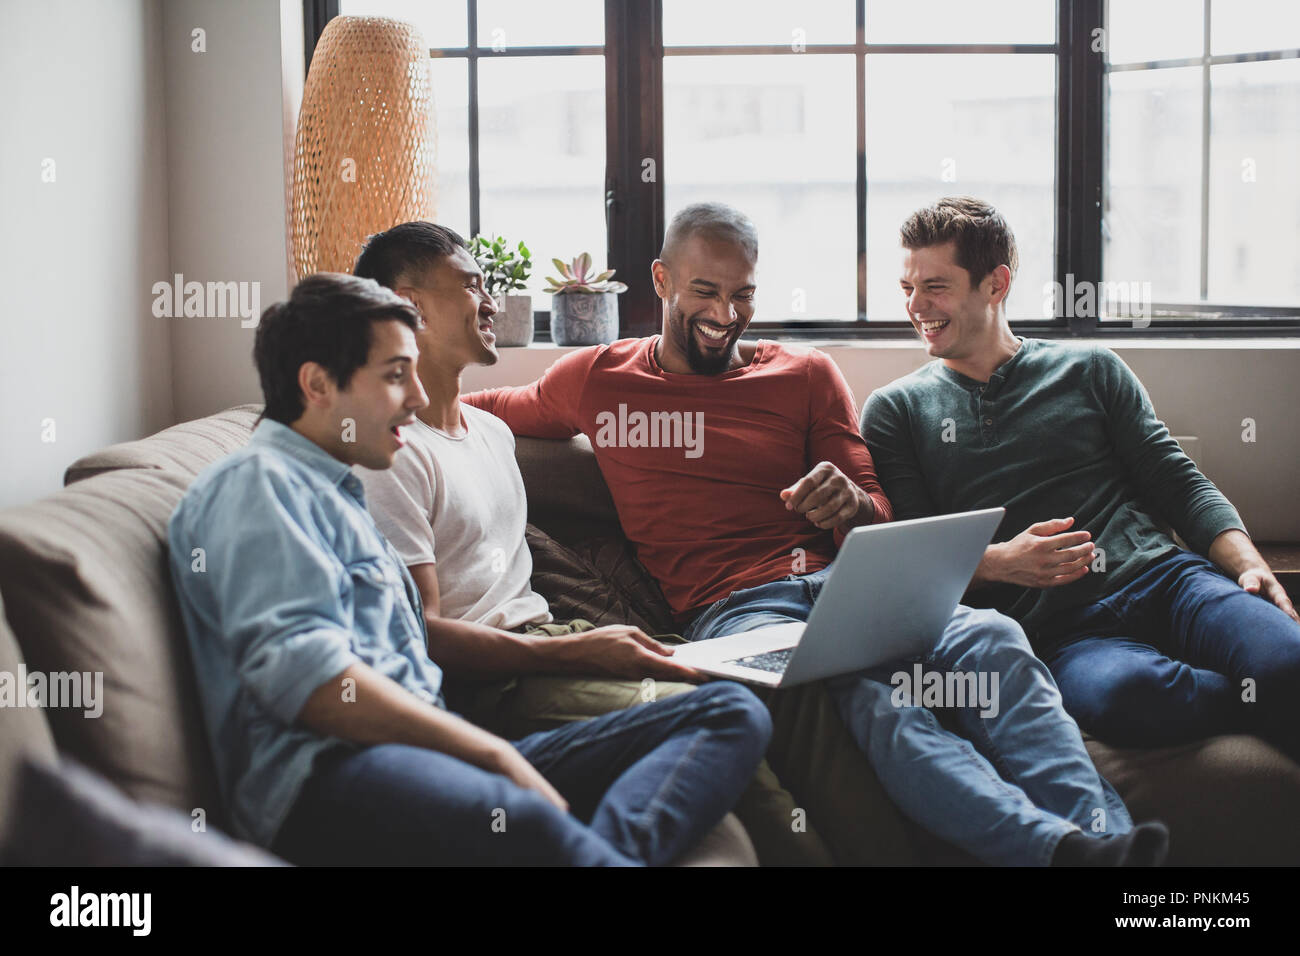 Group of male friends watching video on laptop Stock Photo